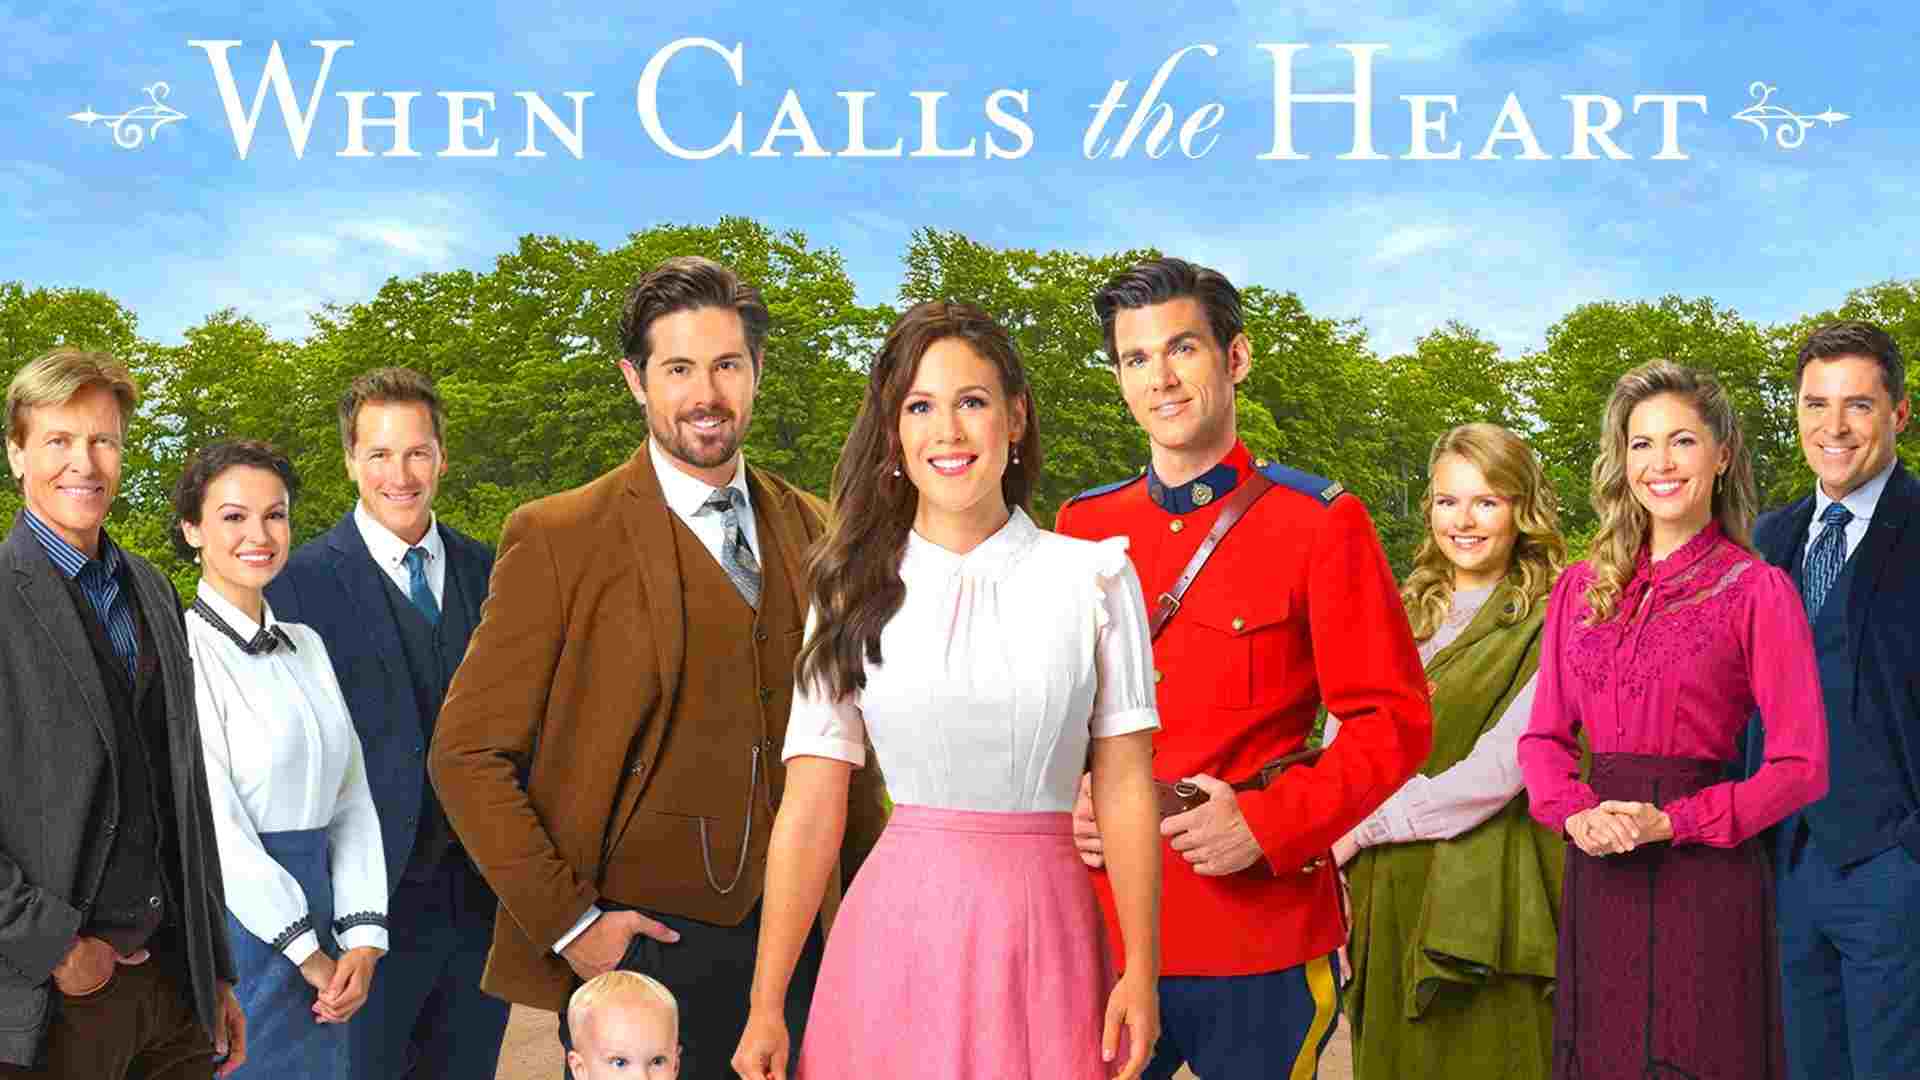 When Calls the Heart Parents Guide And Age Rating | 2022